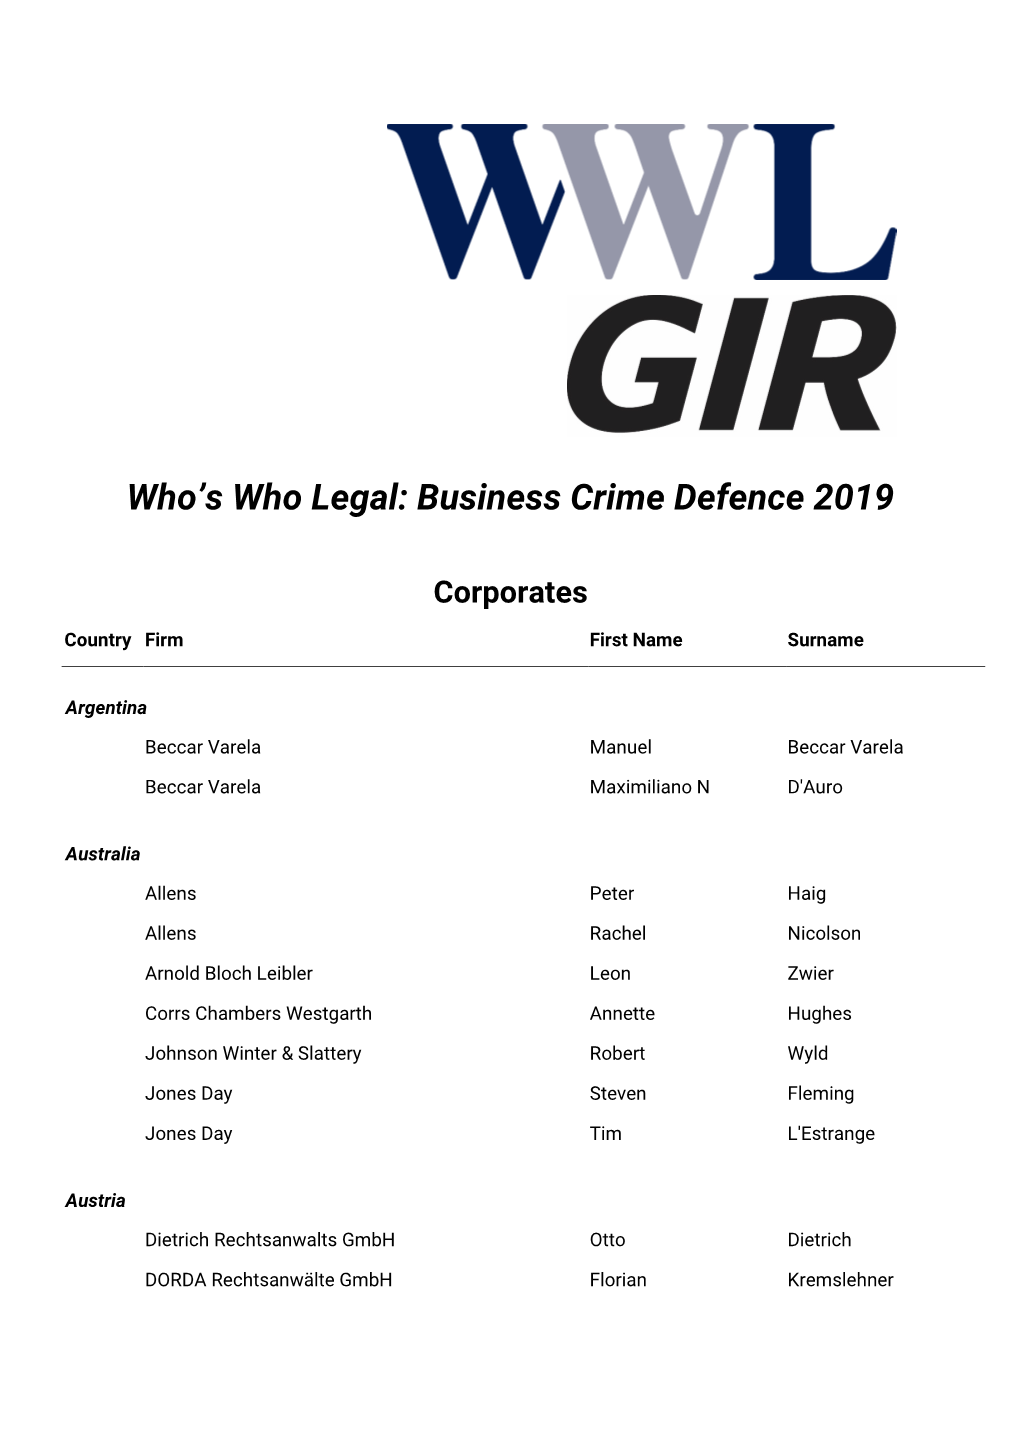 Who's Who Legal: Business Crime Defence 2019